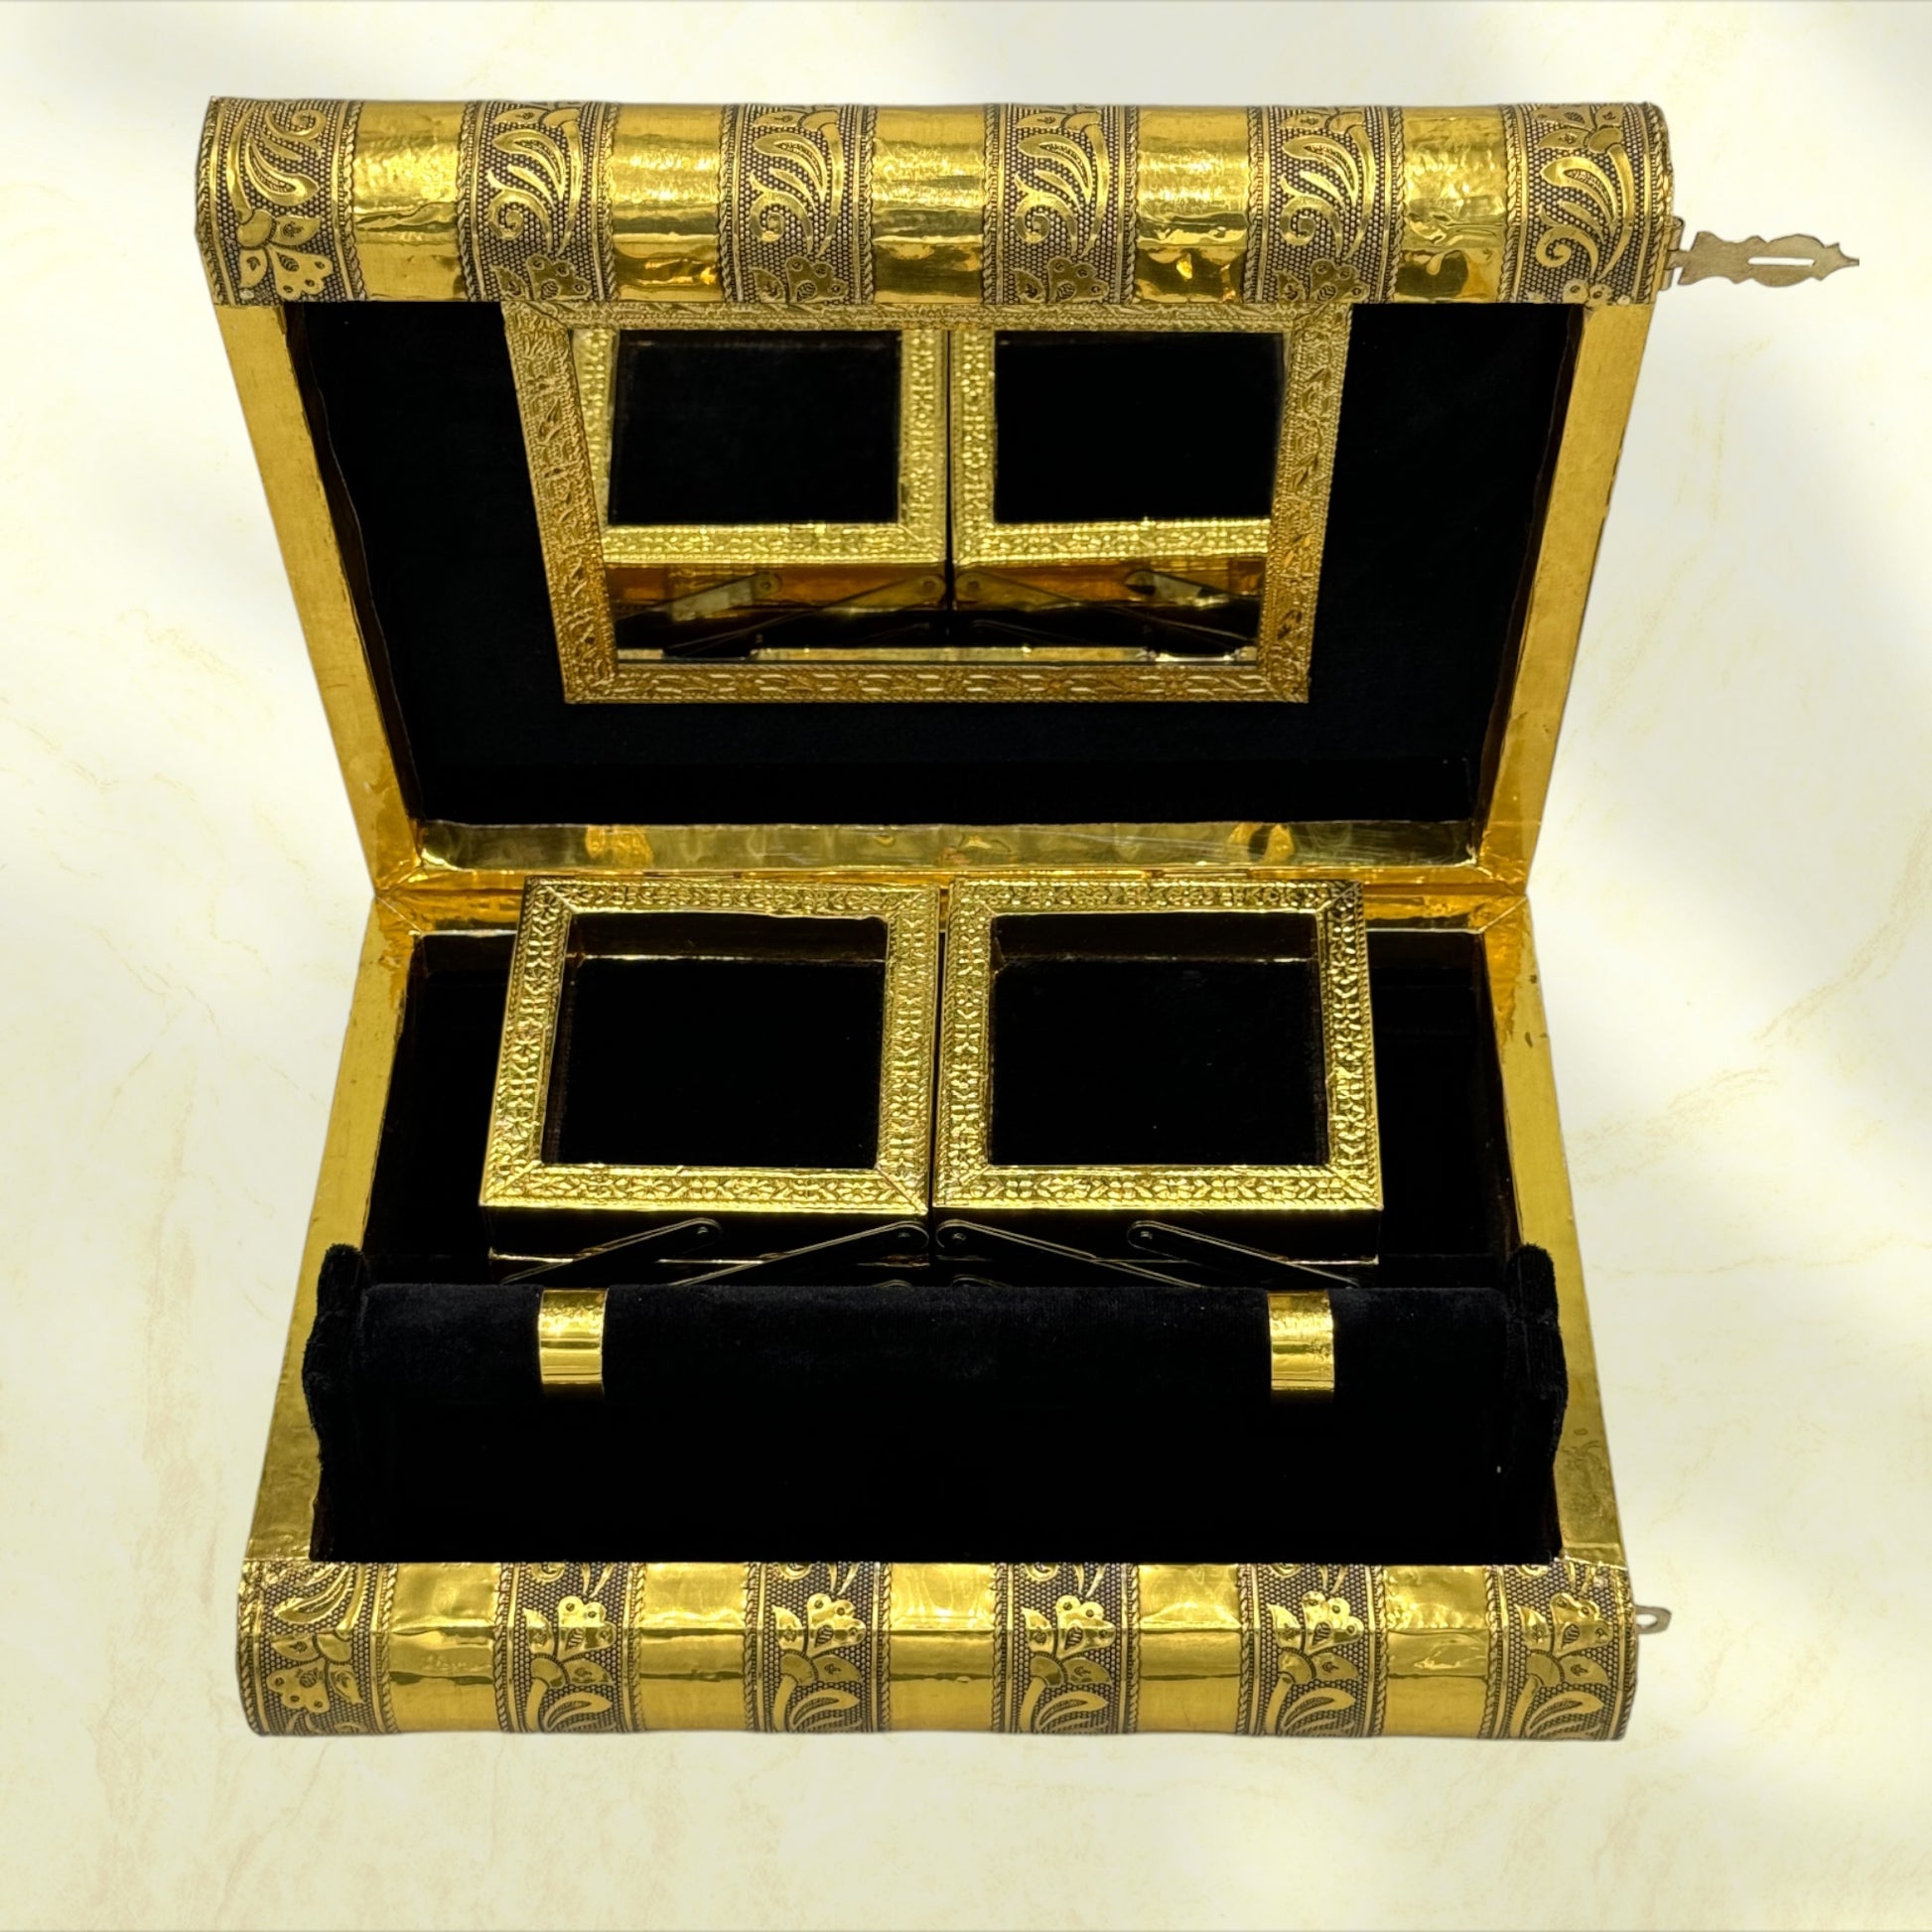 Majestic Indian Tiger Handmade Jewelry Holder Box - Tortuna shows black lined box open with trays closed